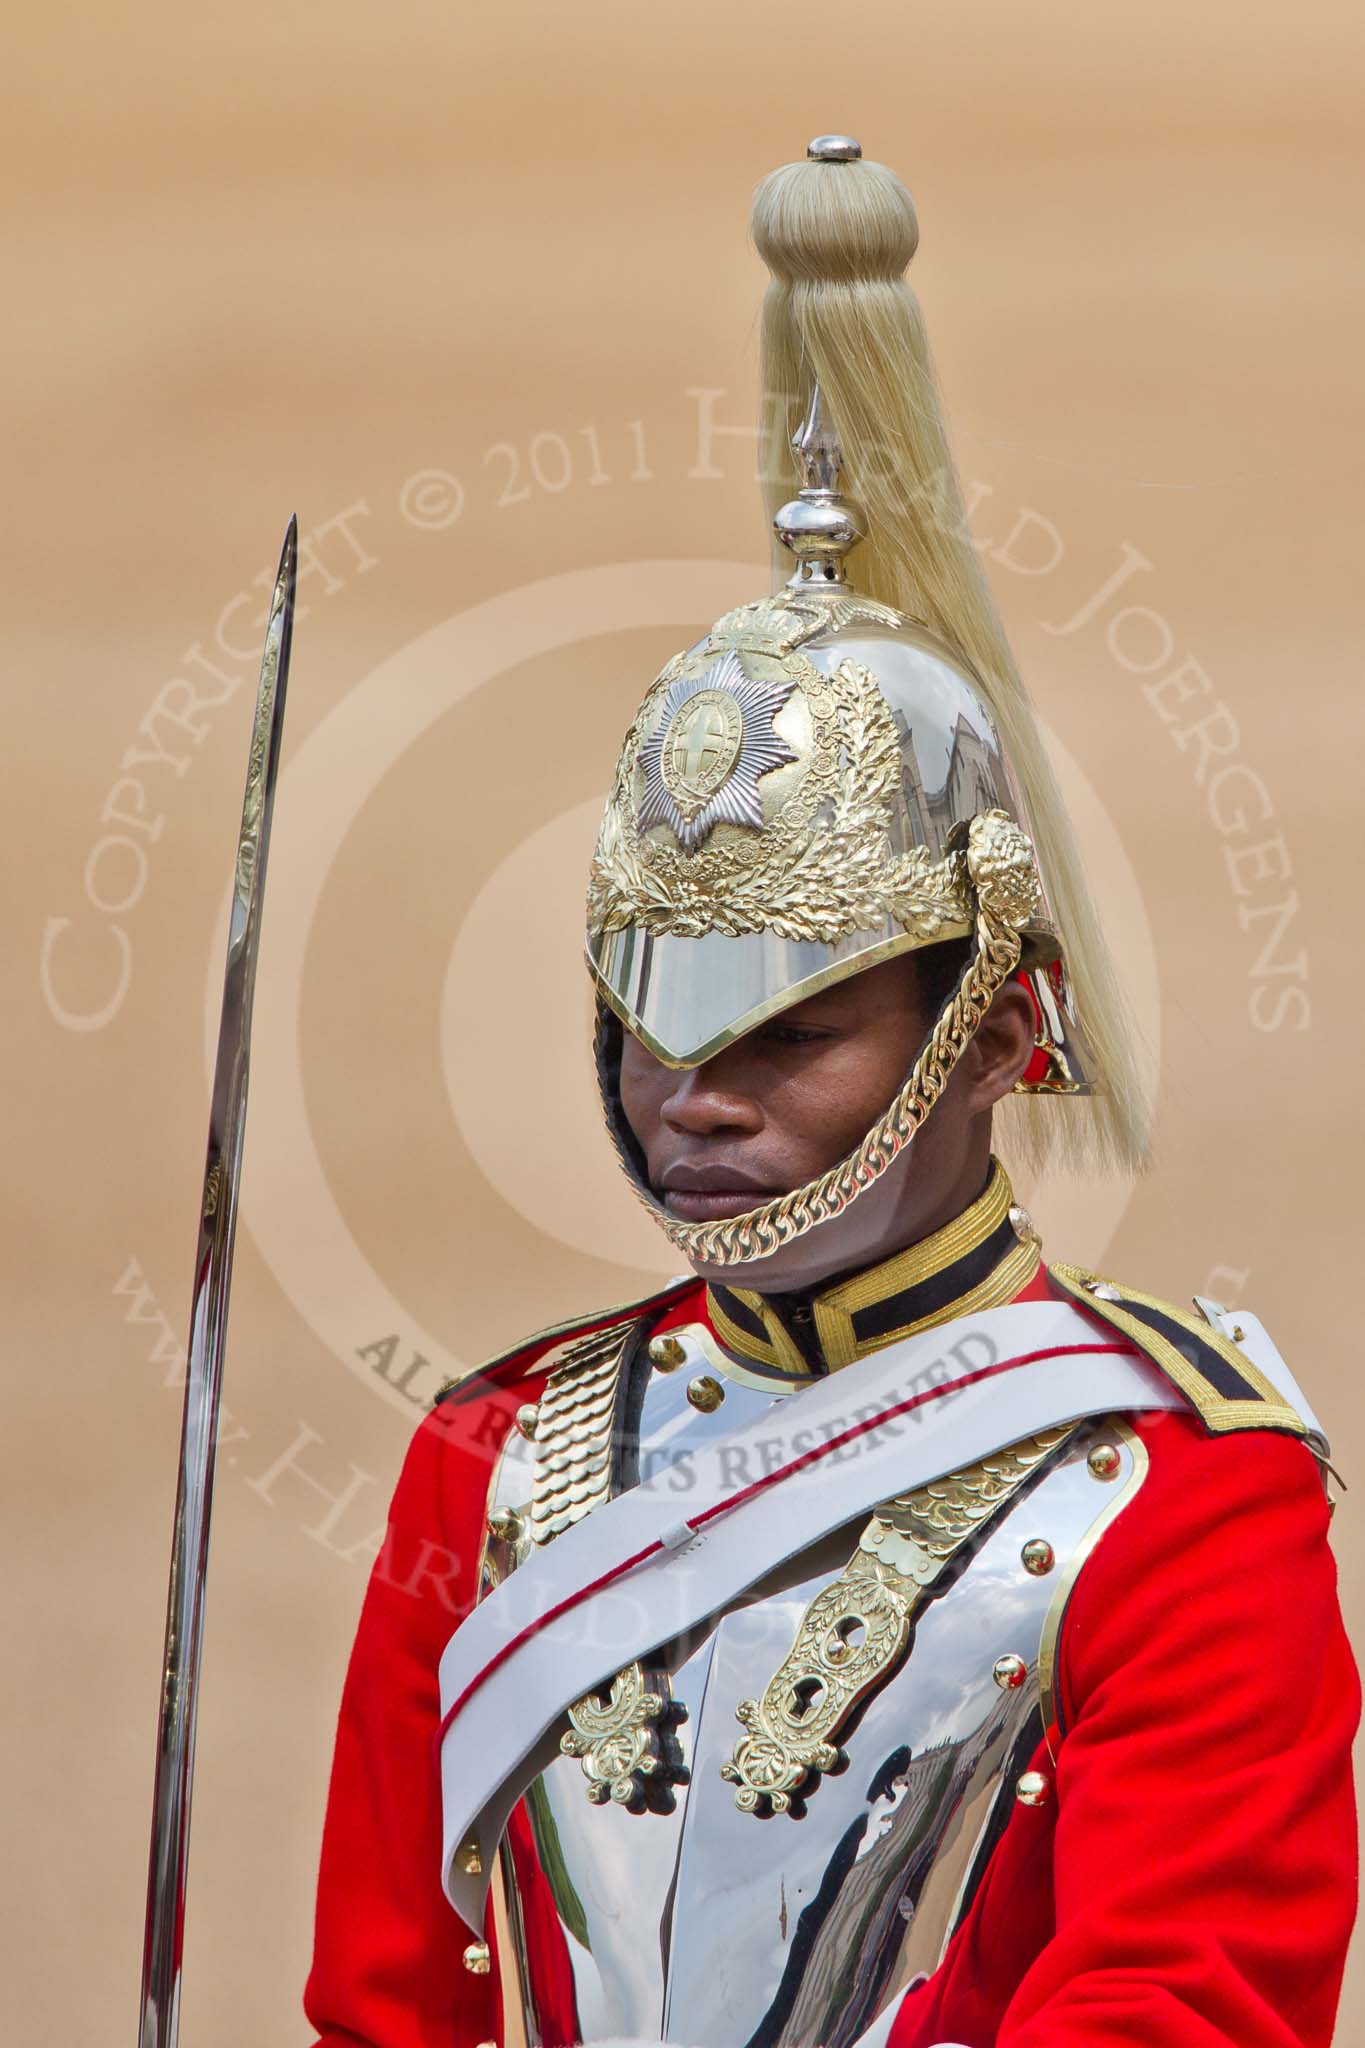 Trooping the Colour 2011: Close-up of one of the four Troopers of The Life Guards following the Brigade Major, leading the Royal Procession..
Horse Guards Parade, Westminster,
London SW1,
Greater London,
United Kingdom,
on 11 June 2011 at 10:57, image #107